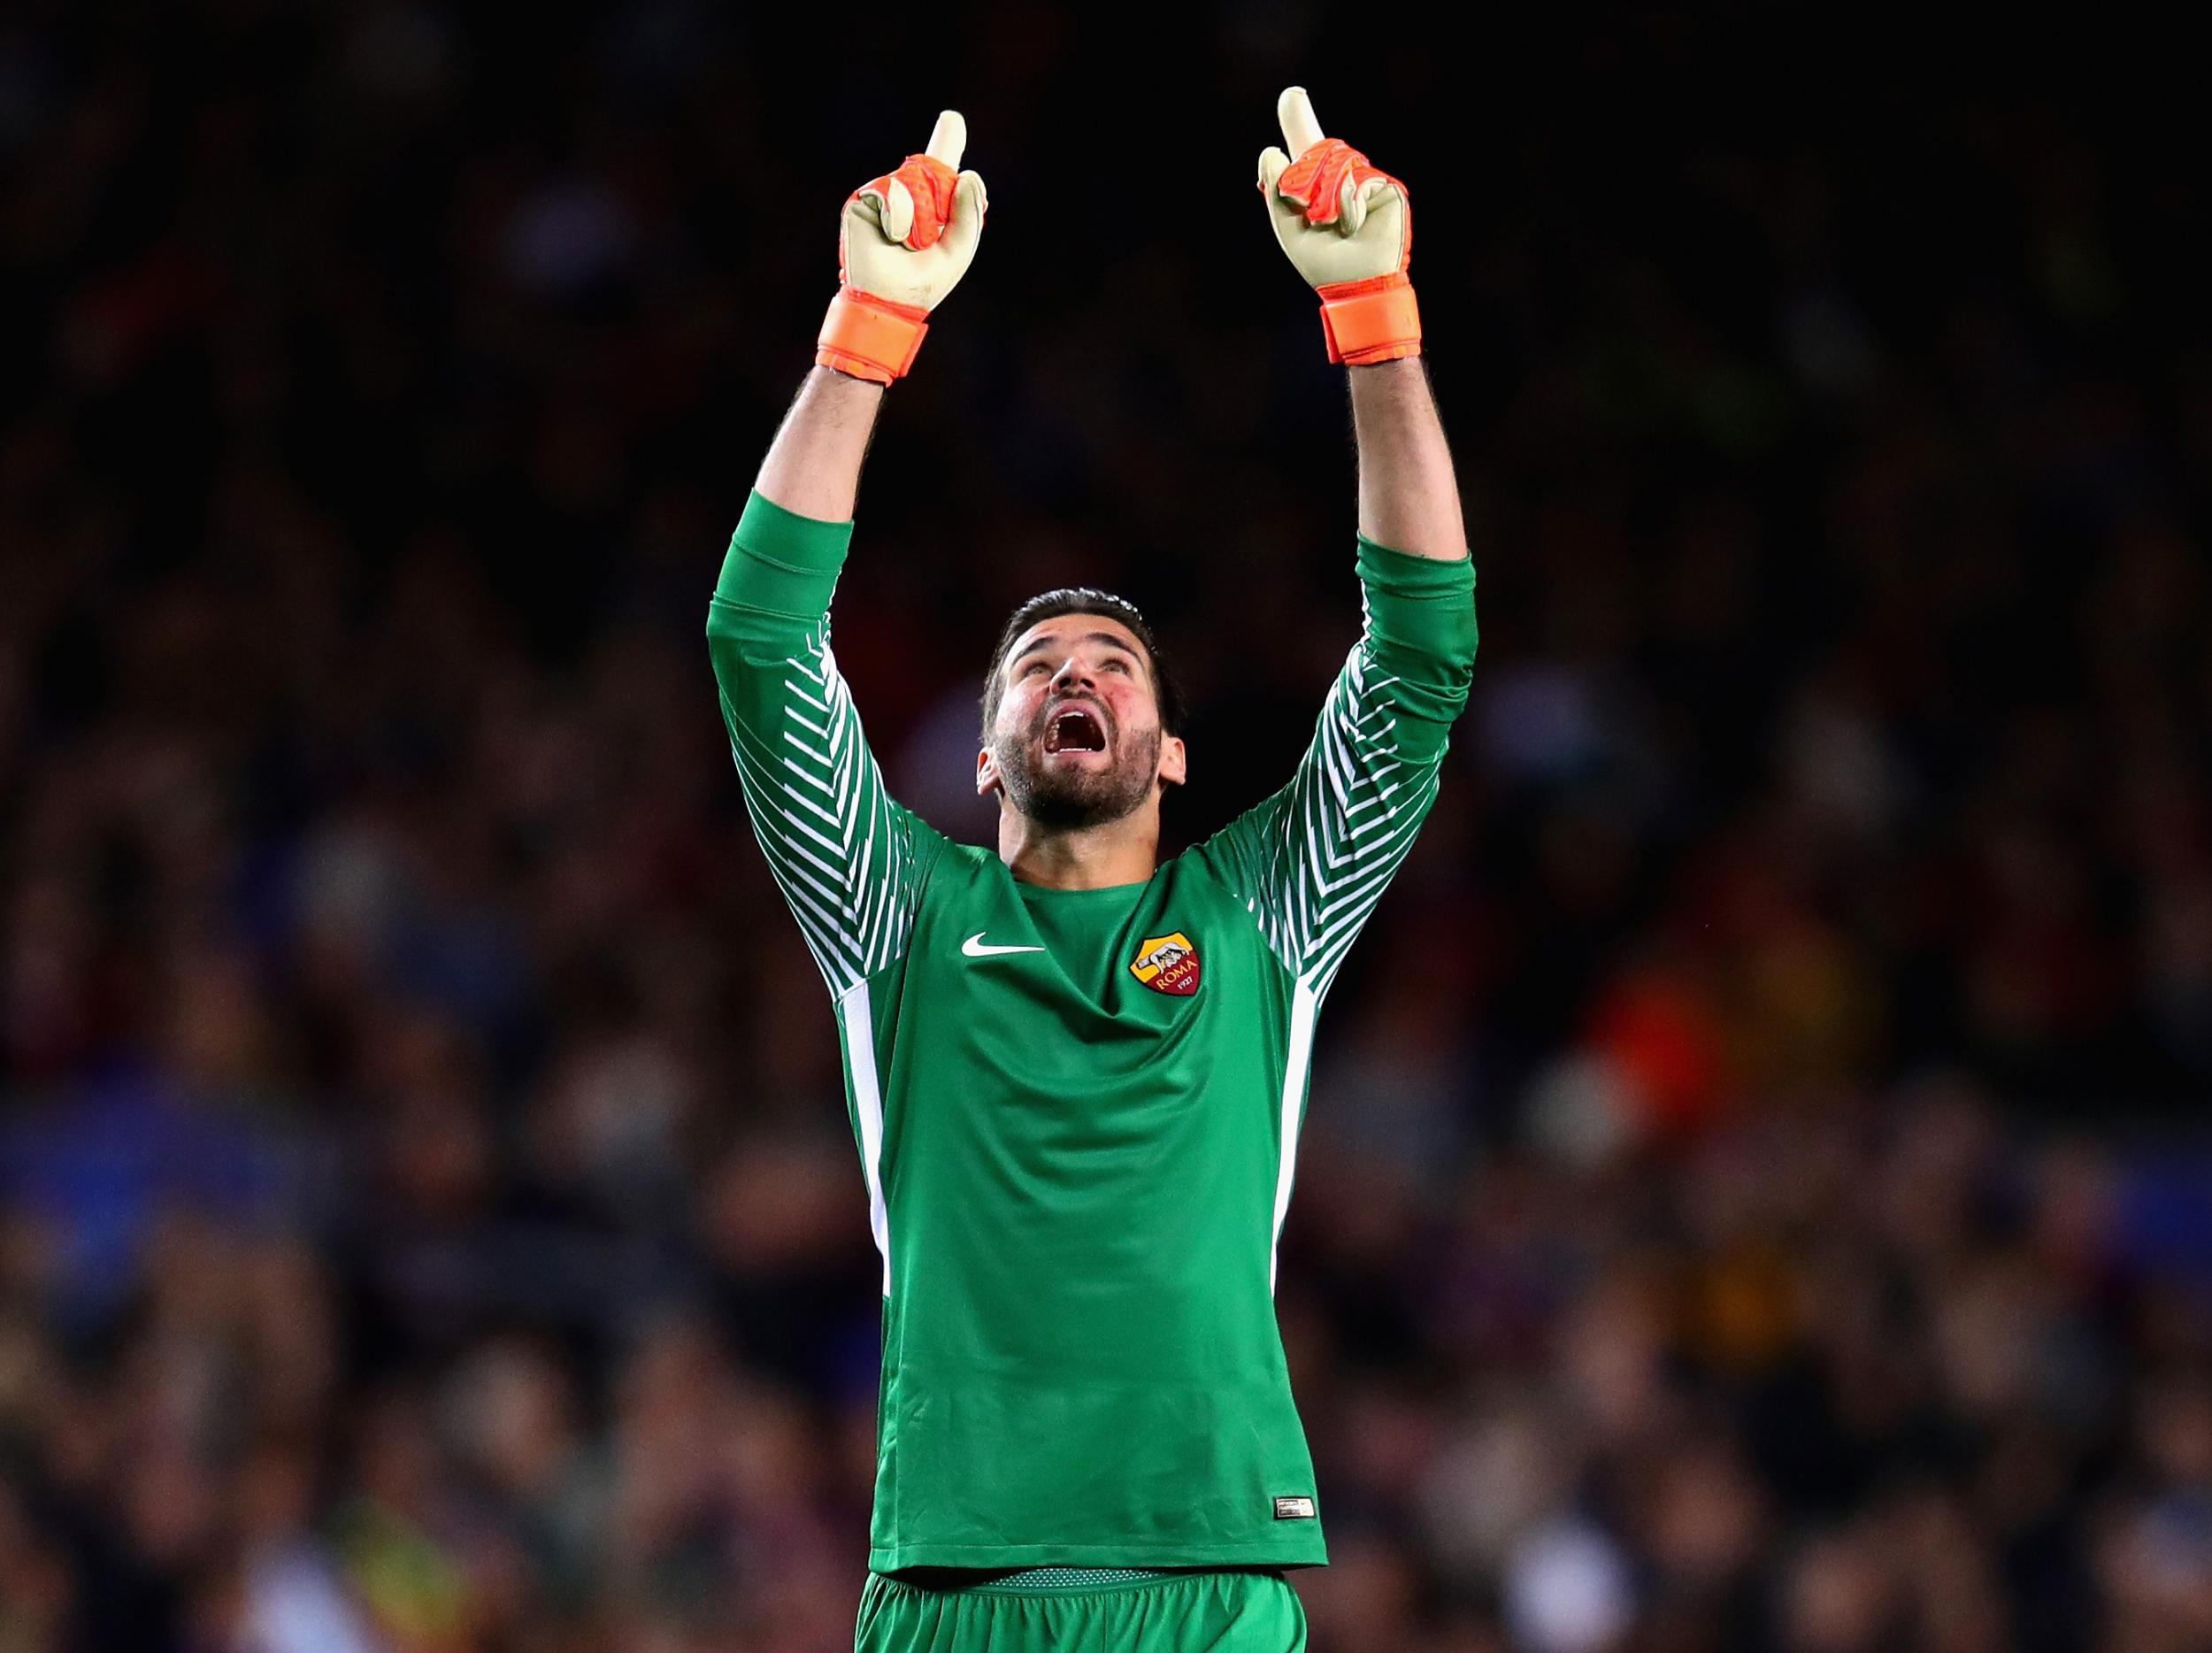 Liverpool transfer news: Alisson bid will force Chelsea and Real Madrid to show their hand over Thibaut Courtois deal